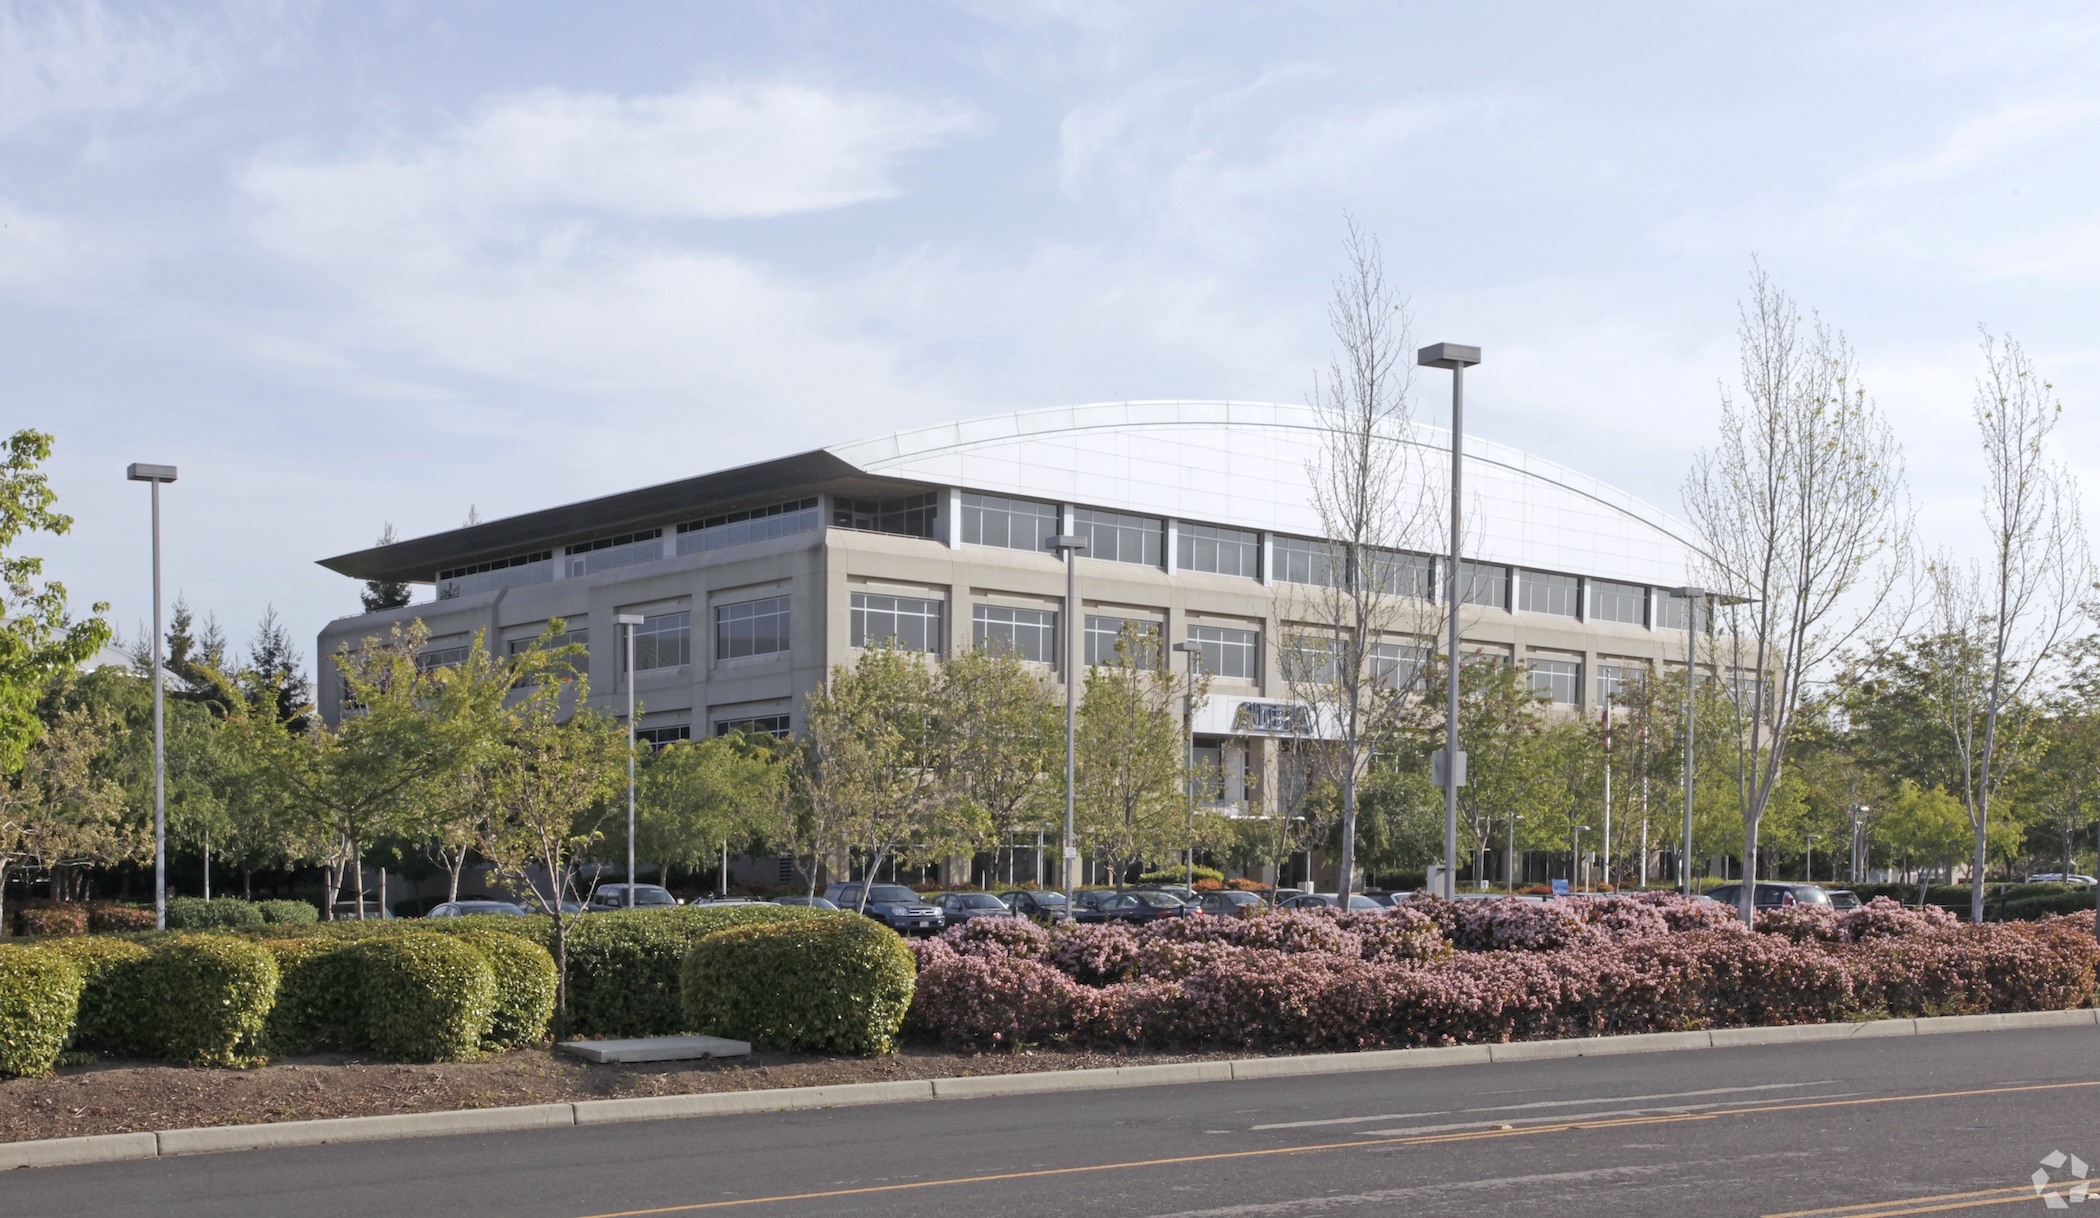 Intel acquired Altera Corp. in 2015. Altera Corp. had been headquartered in the four-building office complex on Innovation Drive in San Jose, California. Intel acquired Altera in 2015. (CoStar)